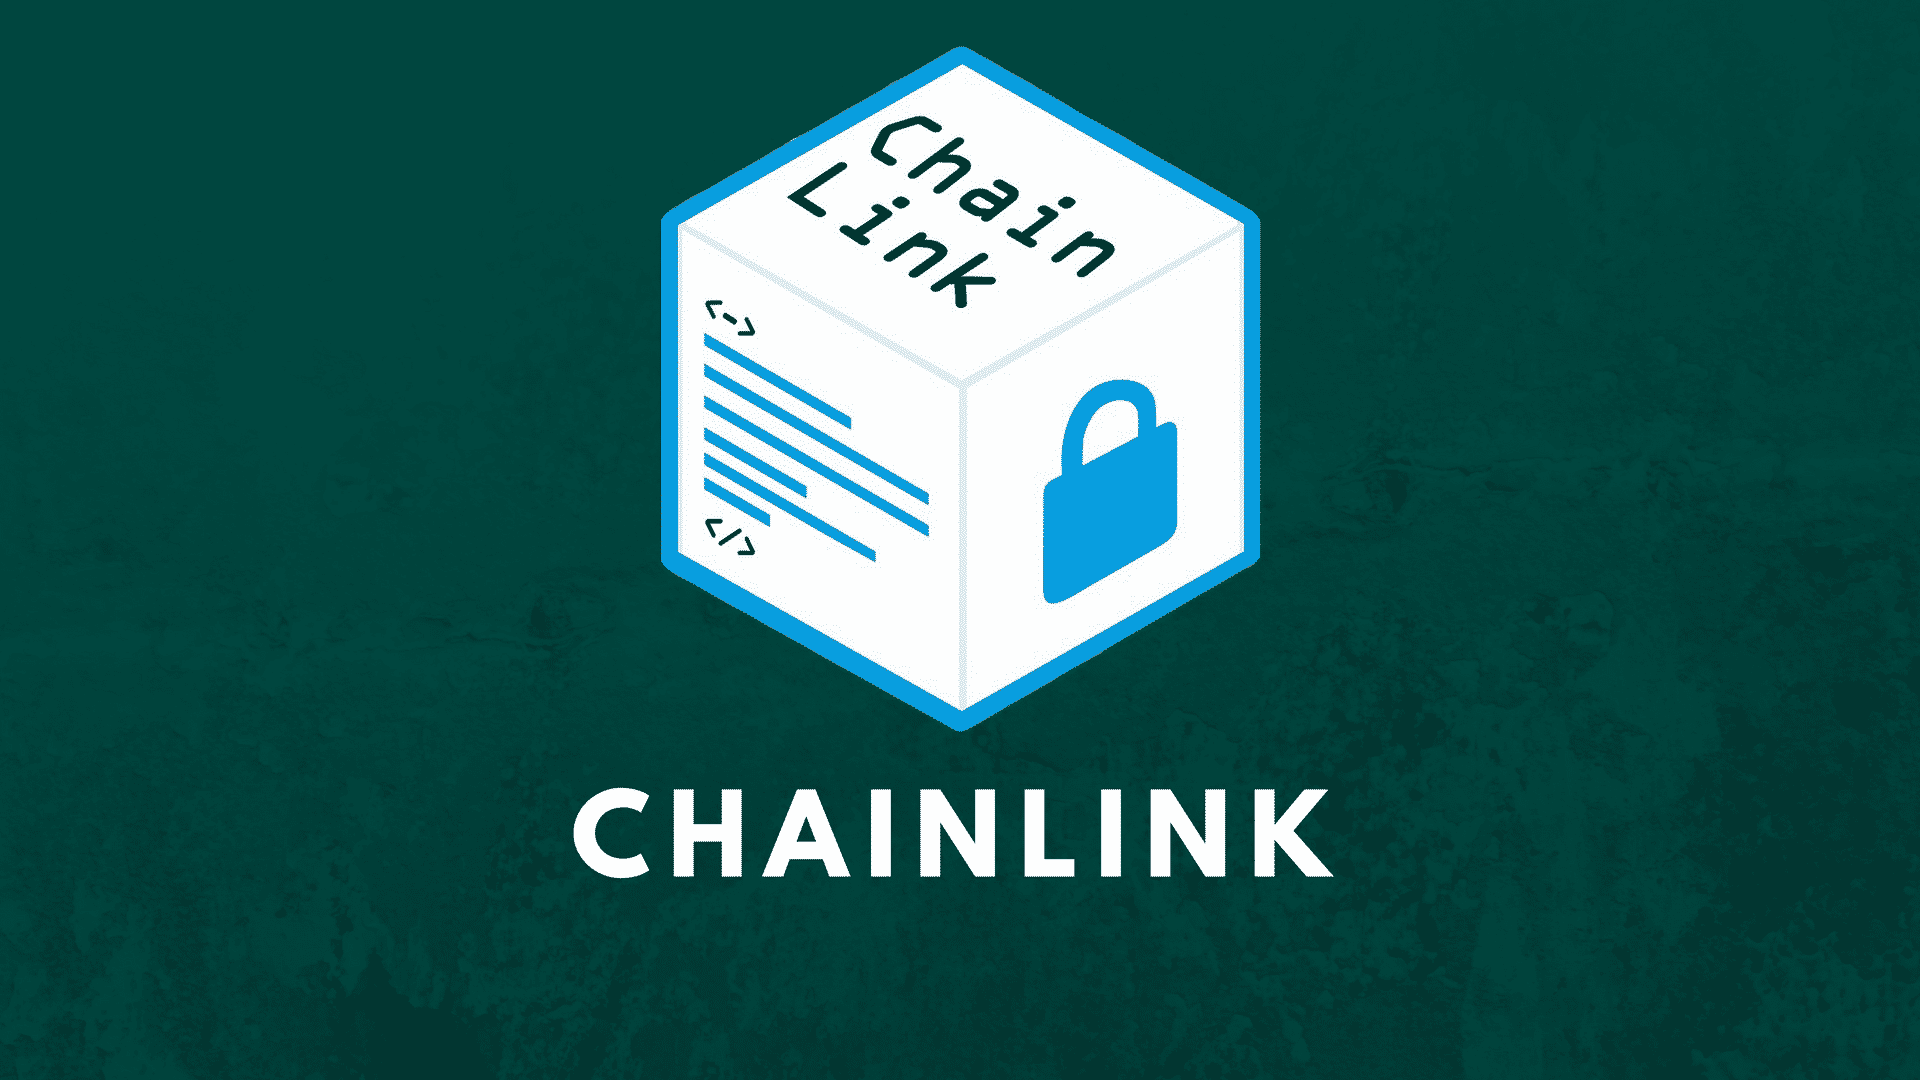 700K ChainLink (Link) Tokens Moved From Dev Wallet To Binance, Is It A Pump and Dump?